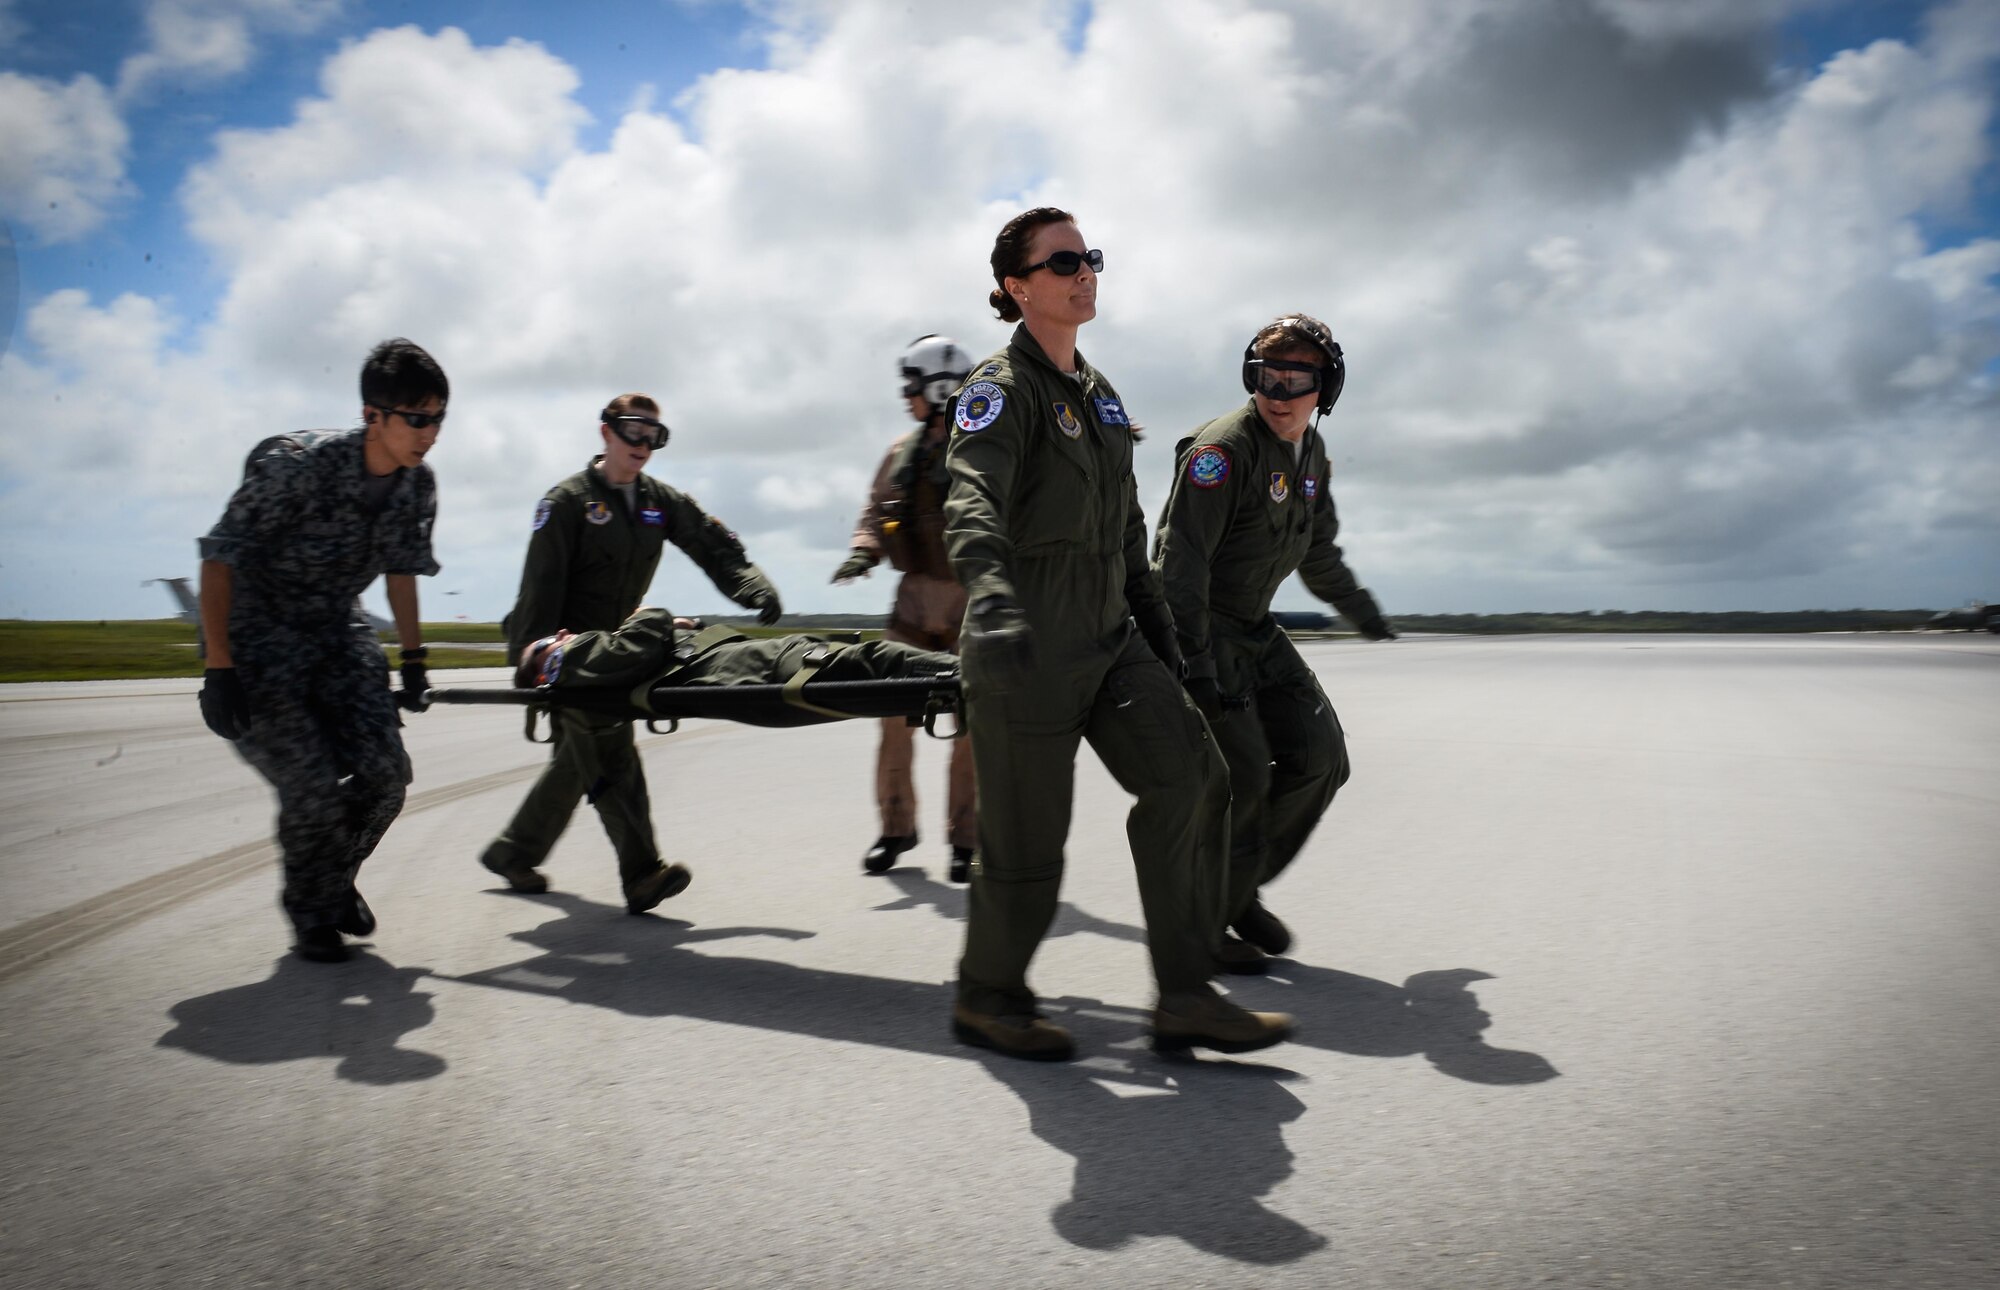 An aeromedical evacuation team of the Japan Air Self-Defense Force and U.S. Air Force carries a patient with simulated injuries from a  U.S. Navy MH-60S Seahawk to a waiting C-130 Hercules during a patient transfer training Feb. 17, 2016, at Andersen Air Force Base, Guam. Exercise Cope North 16 enhances humanitarian assistance and disaster relief crisis response capabilities between six nations and lays the foundation for regional cooperation expansion during real-world contingencies in the Indo-Asia-Pacific Region. The MH-60S is assigned to Helicopter Sea Combat Squadron 25. (U.S. Air Force photo by Staff Sgt. Alexander W. Riedel/Released)